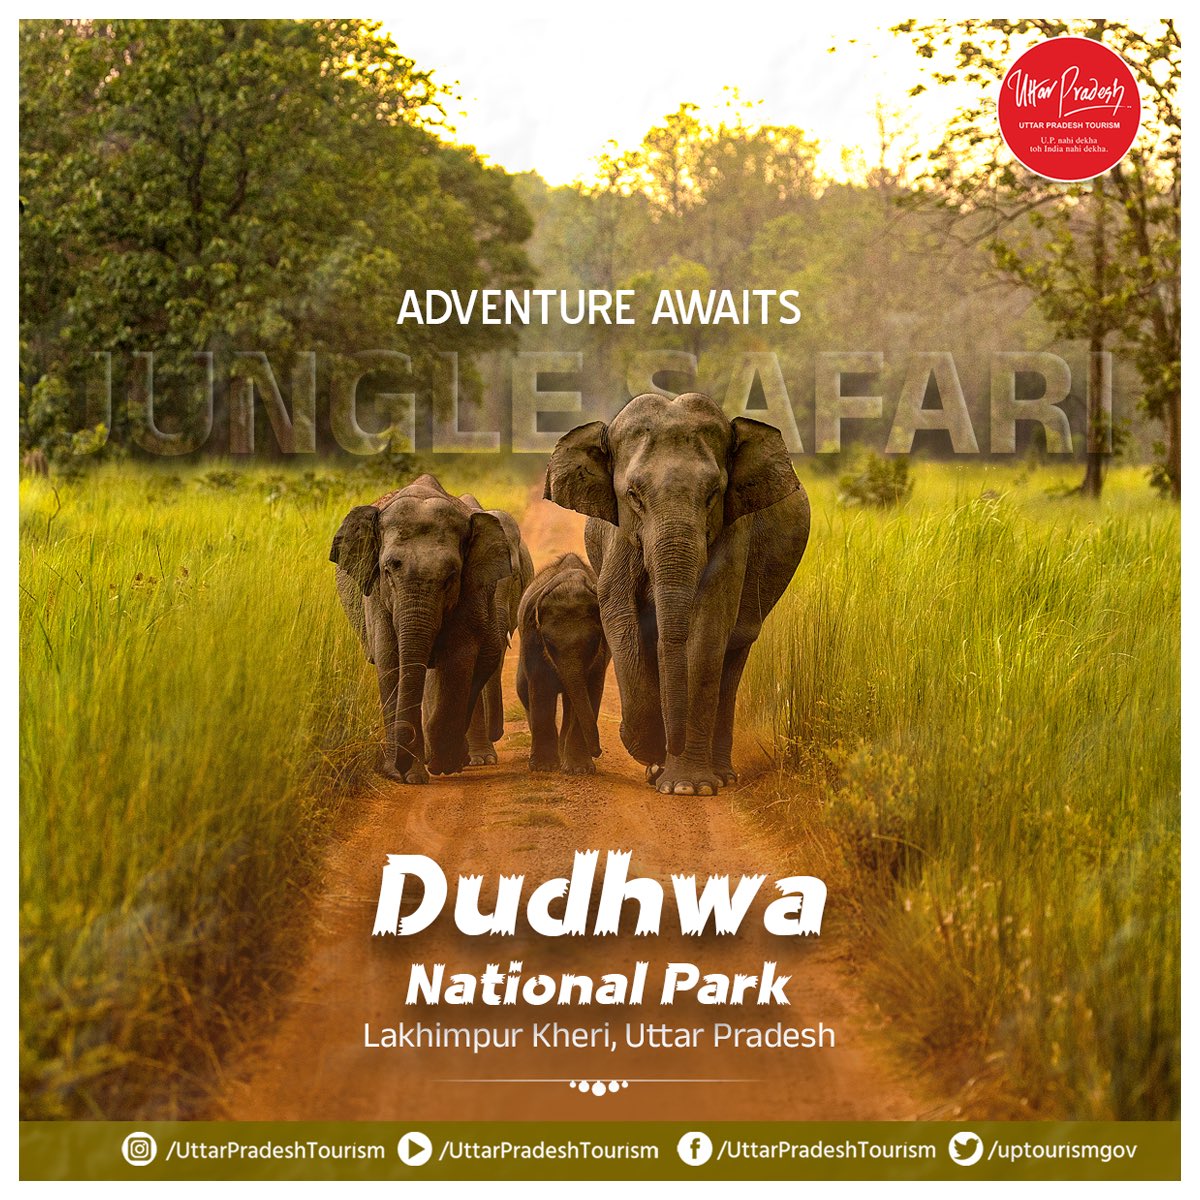 #DudhwaNationalPark, located in the Terai region of #UttarPradesh, offers thrilling jungle safaris. Visitors can explore the park's diverse landscapes, including dense forests, grasslands, & wetlands, while spotting wildlife such as tigers, elephants, rhinoceroses, & swamp deer.